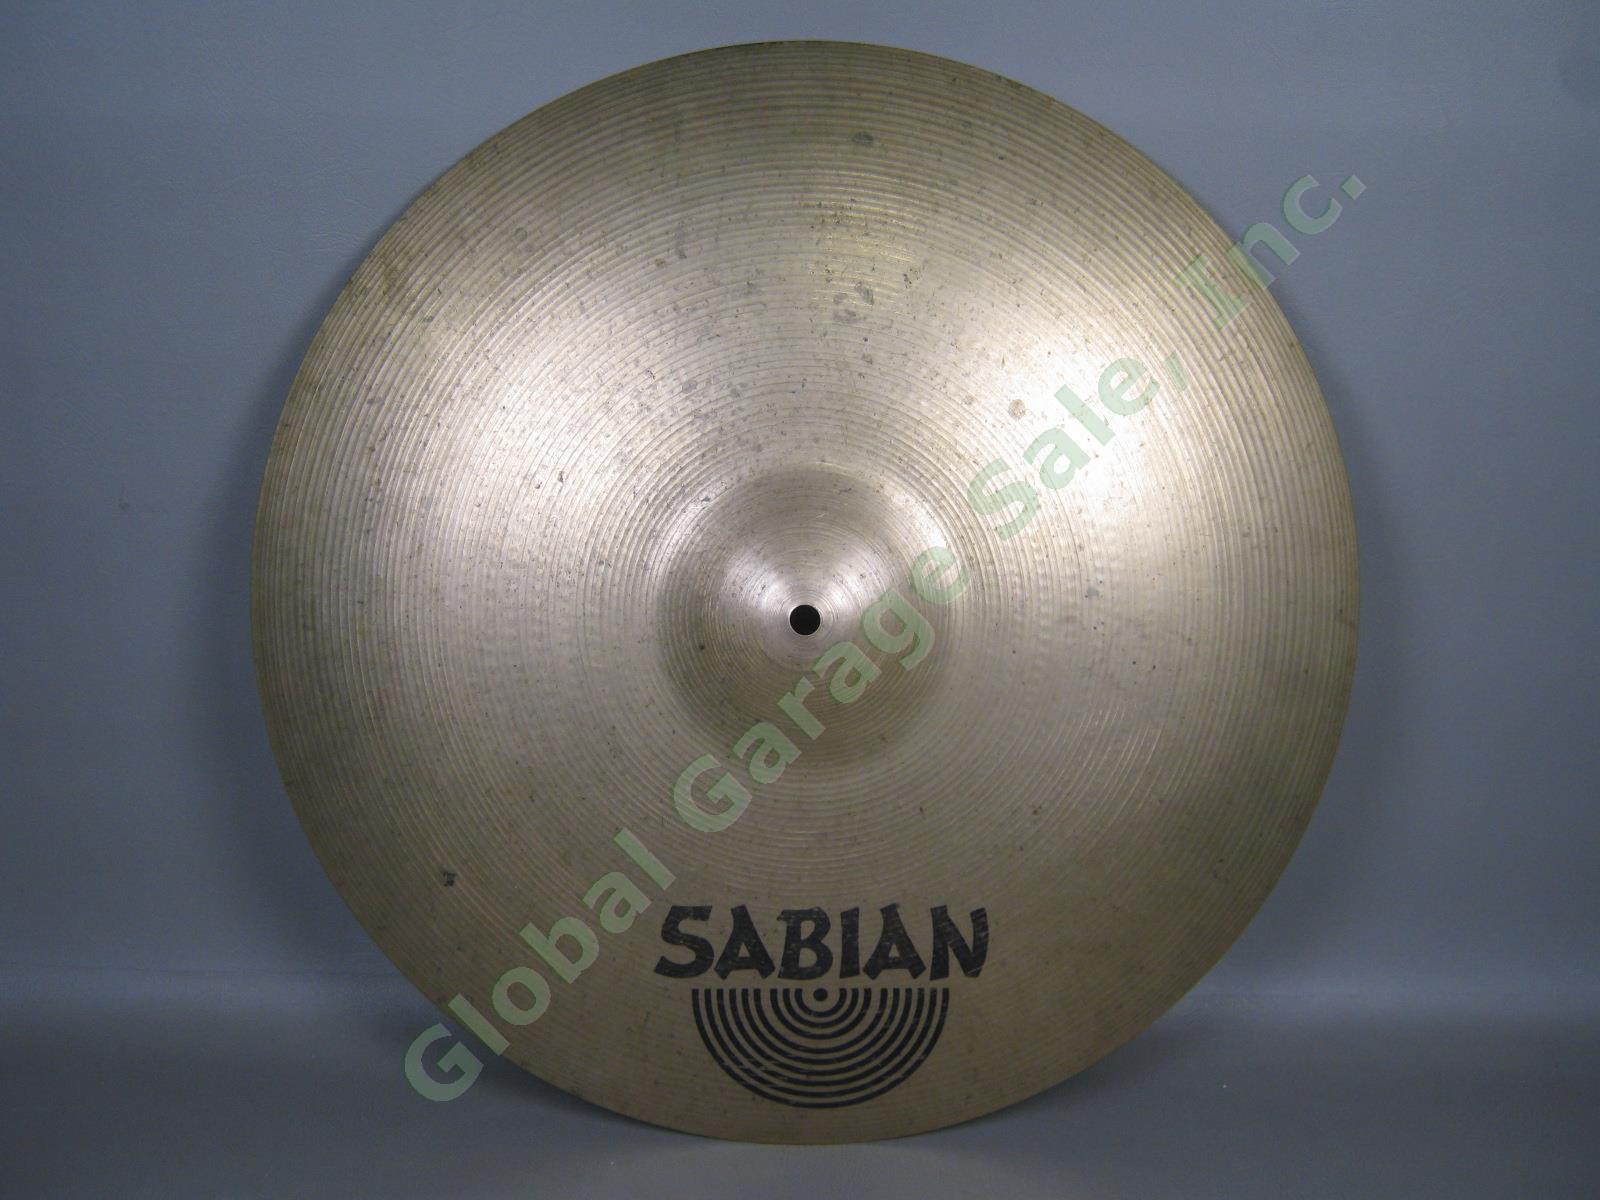 Sabian 20" Inch Ride Drum Cymbal Made In Canada Exc Cond NO RESERVE PRICE!